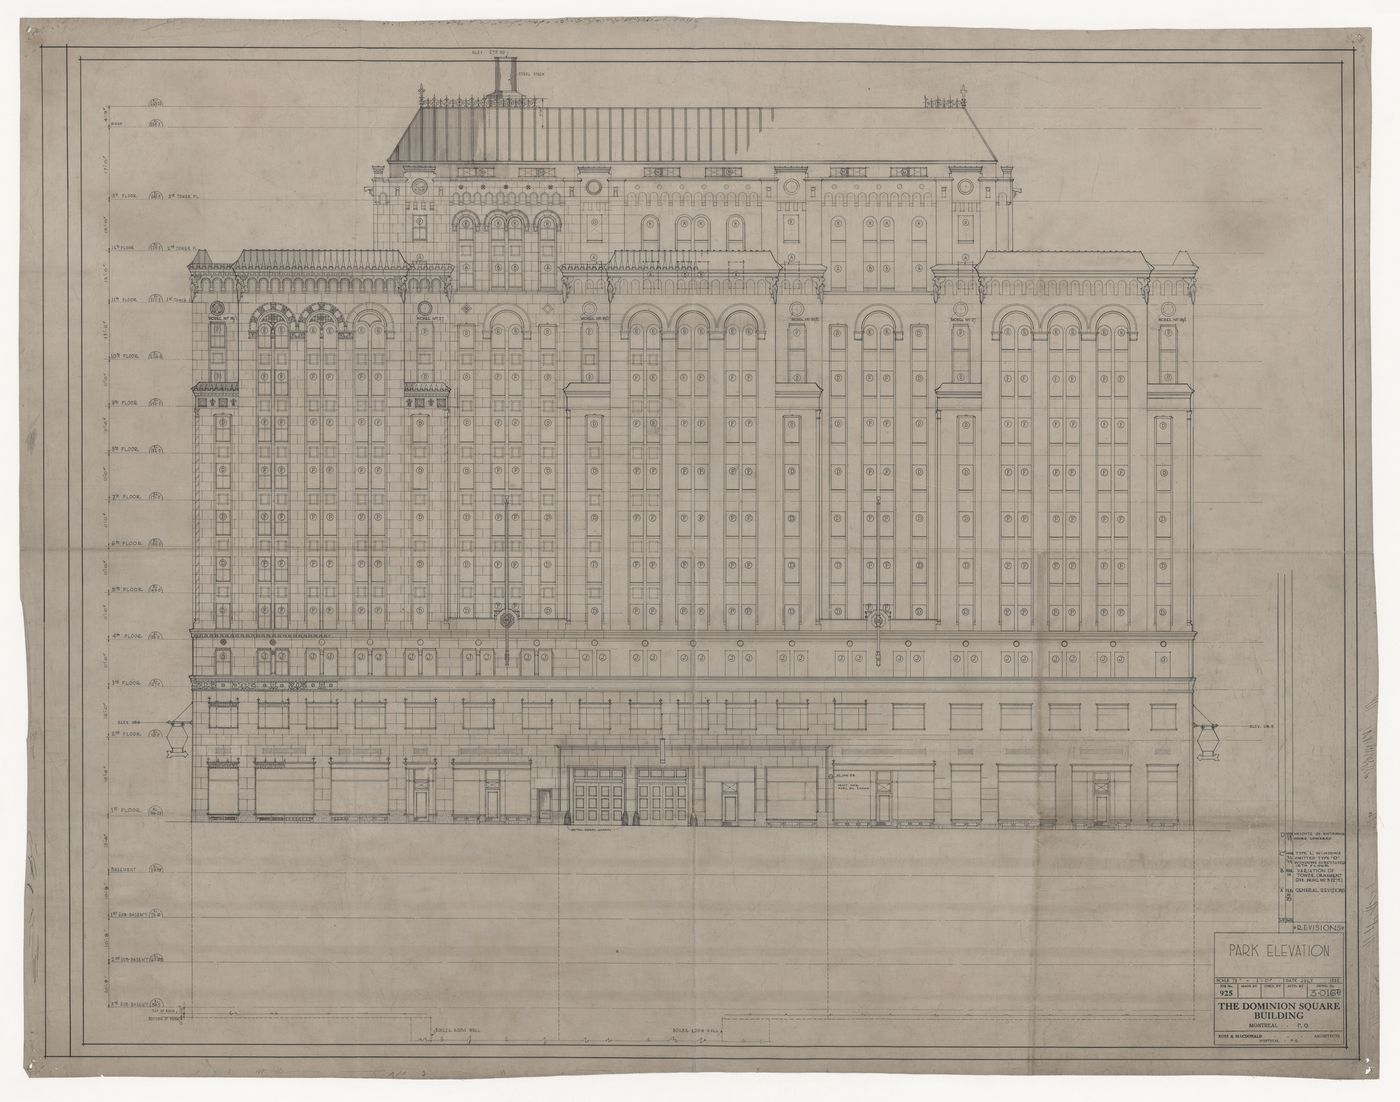 Elevation for Dominion Square Building, Montreal, Québec